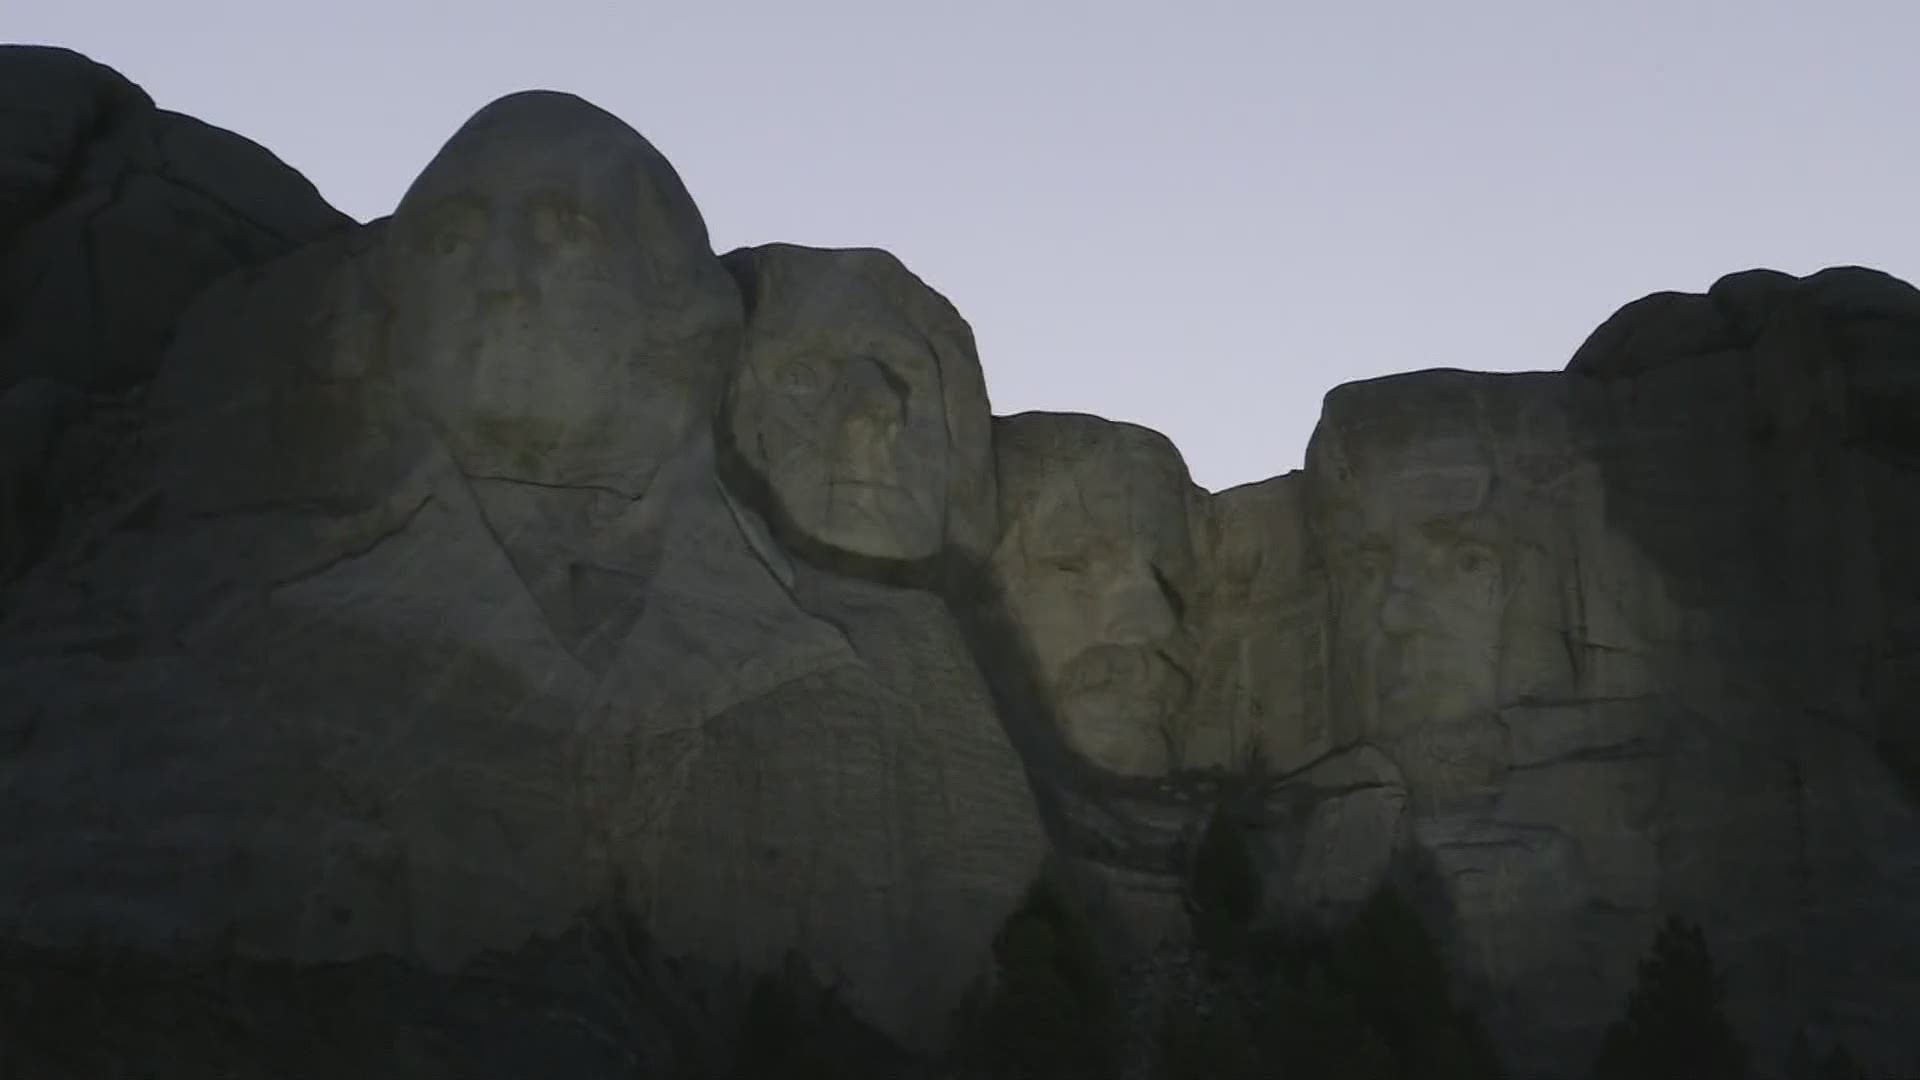 President Donald Trump spoke at a July Fourth event at Mount Rushmore, July 3, 2020.